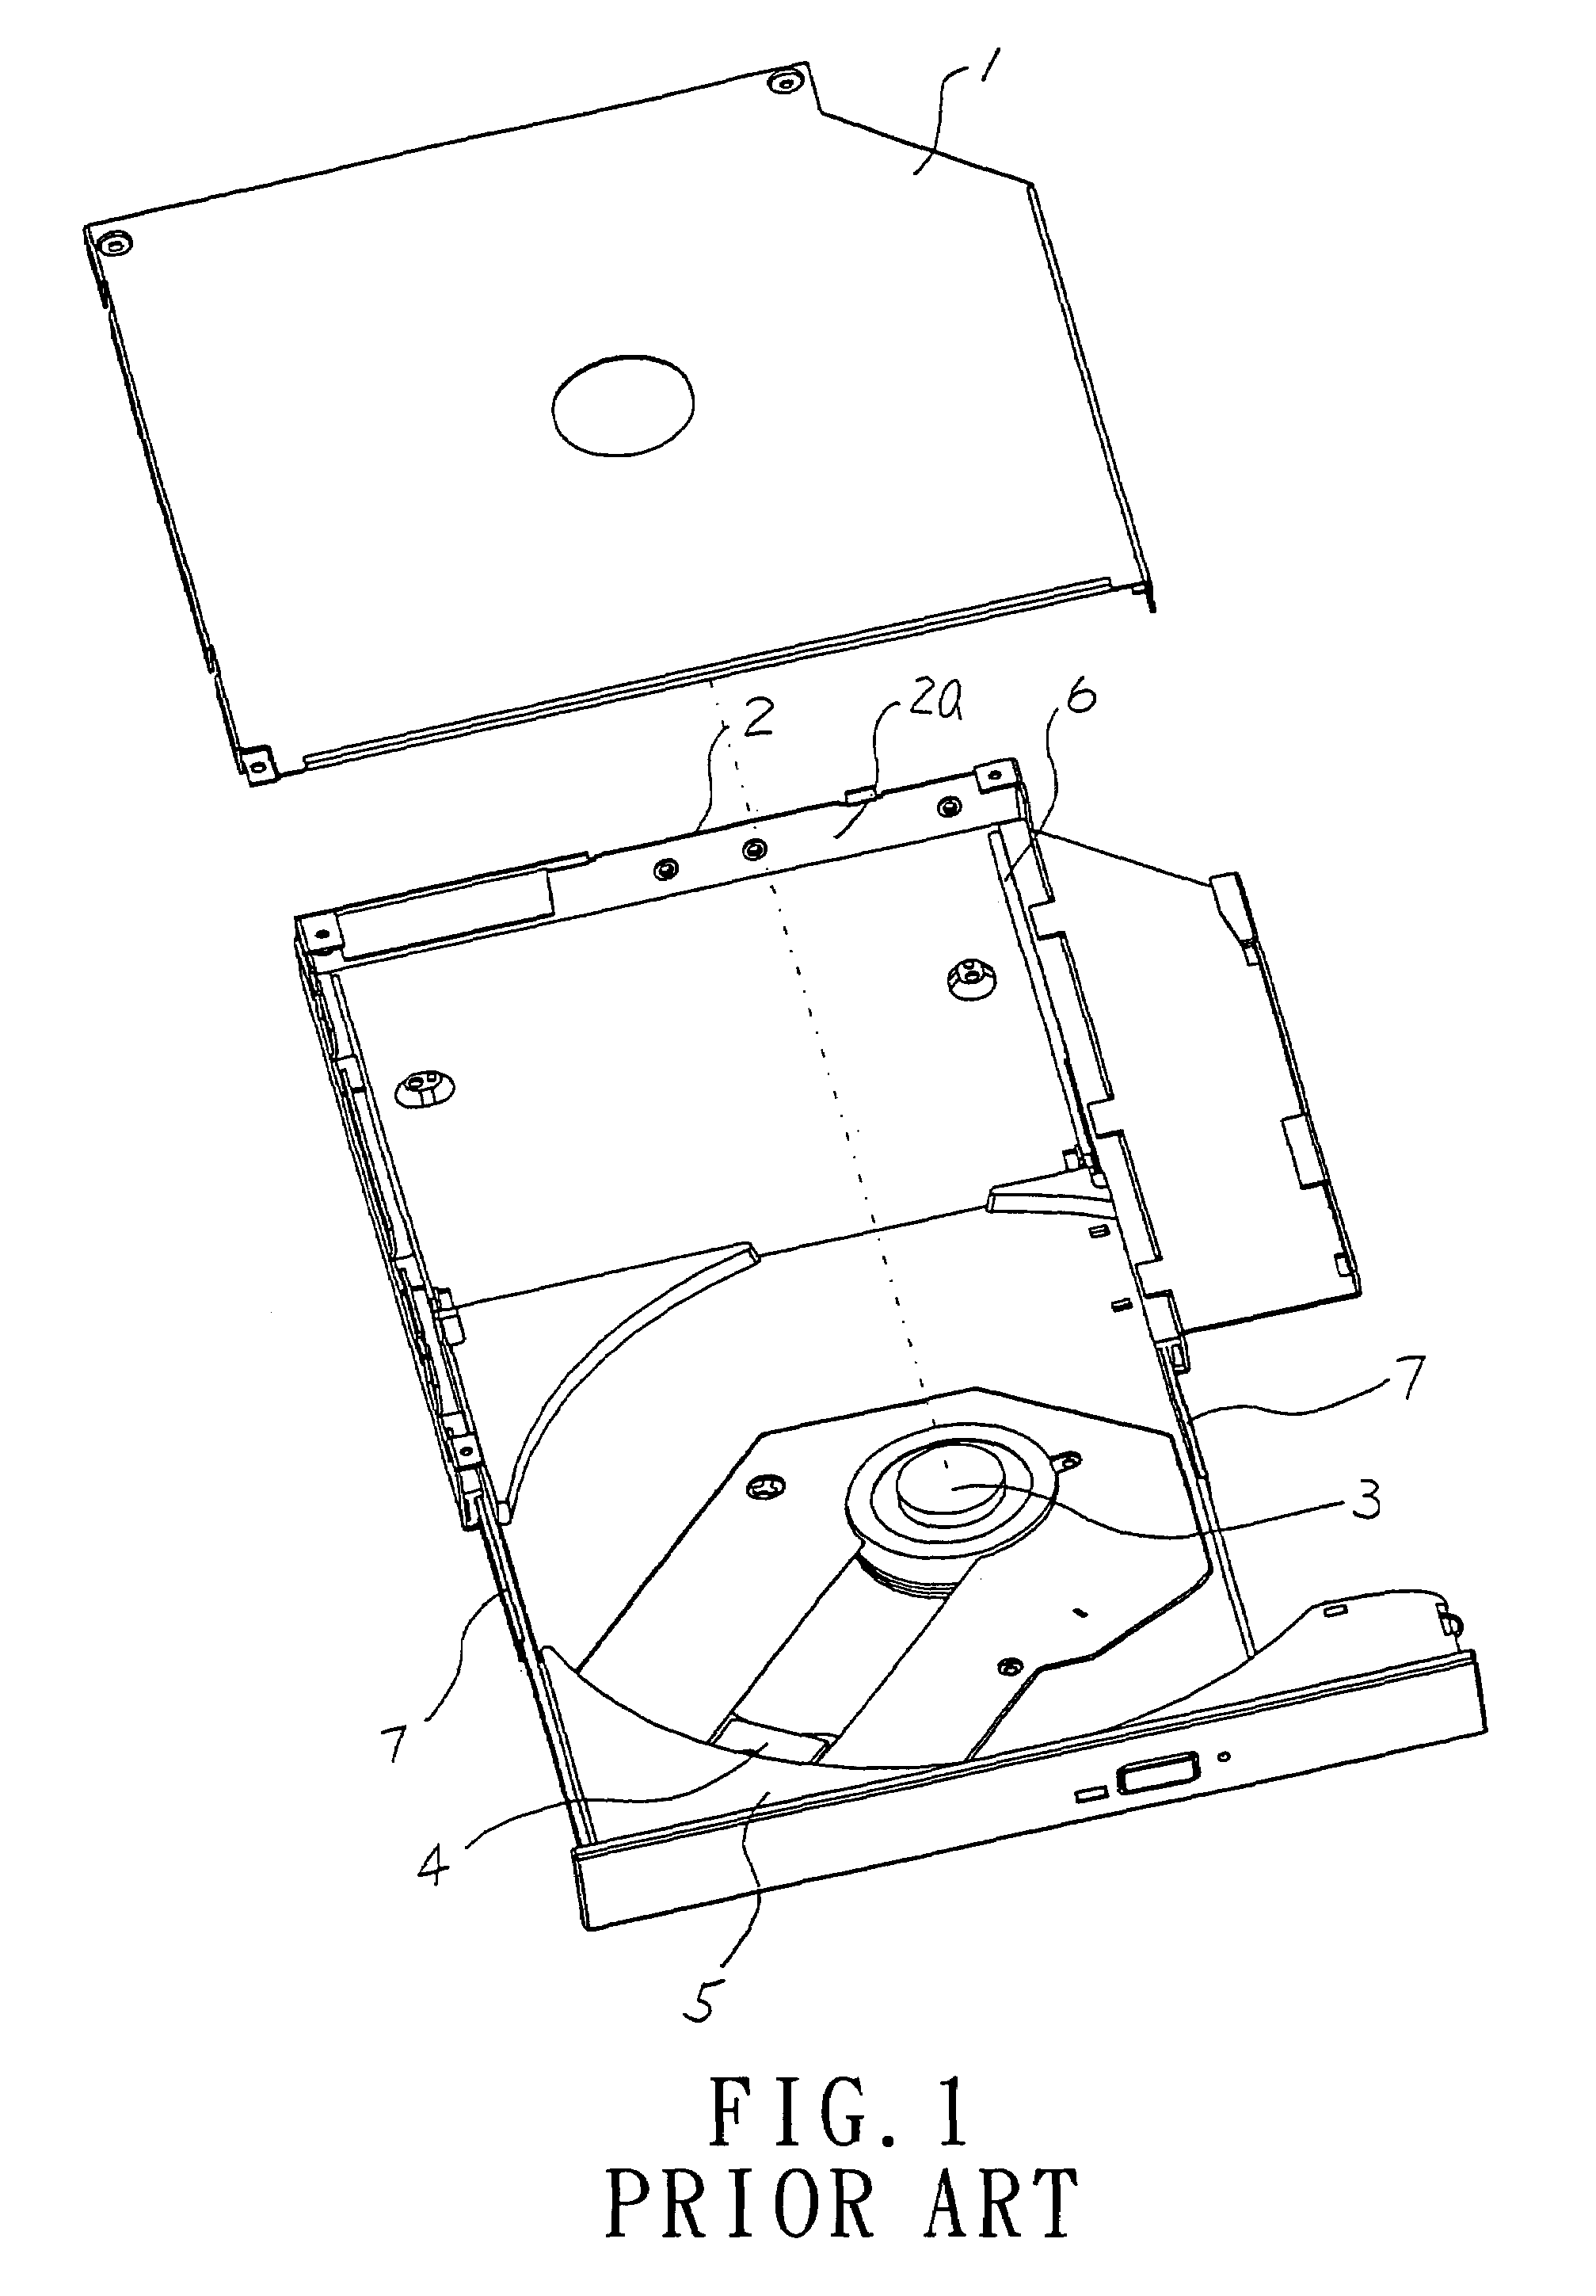 Sliding mechanism for optical compact disk drive